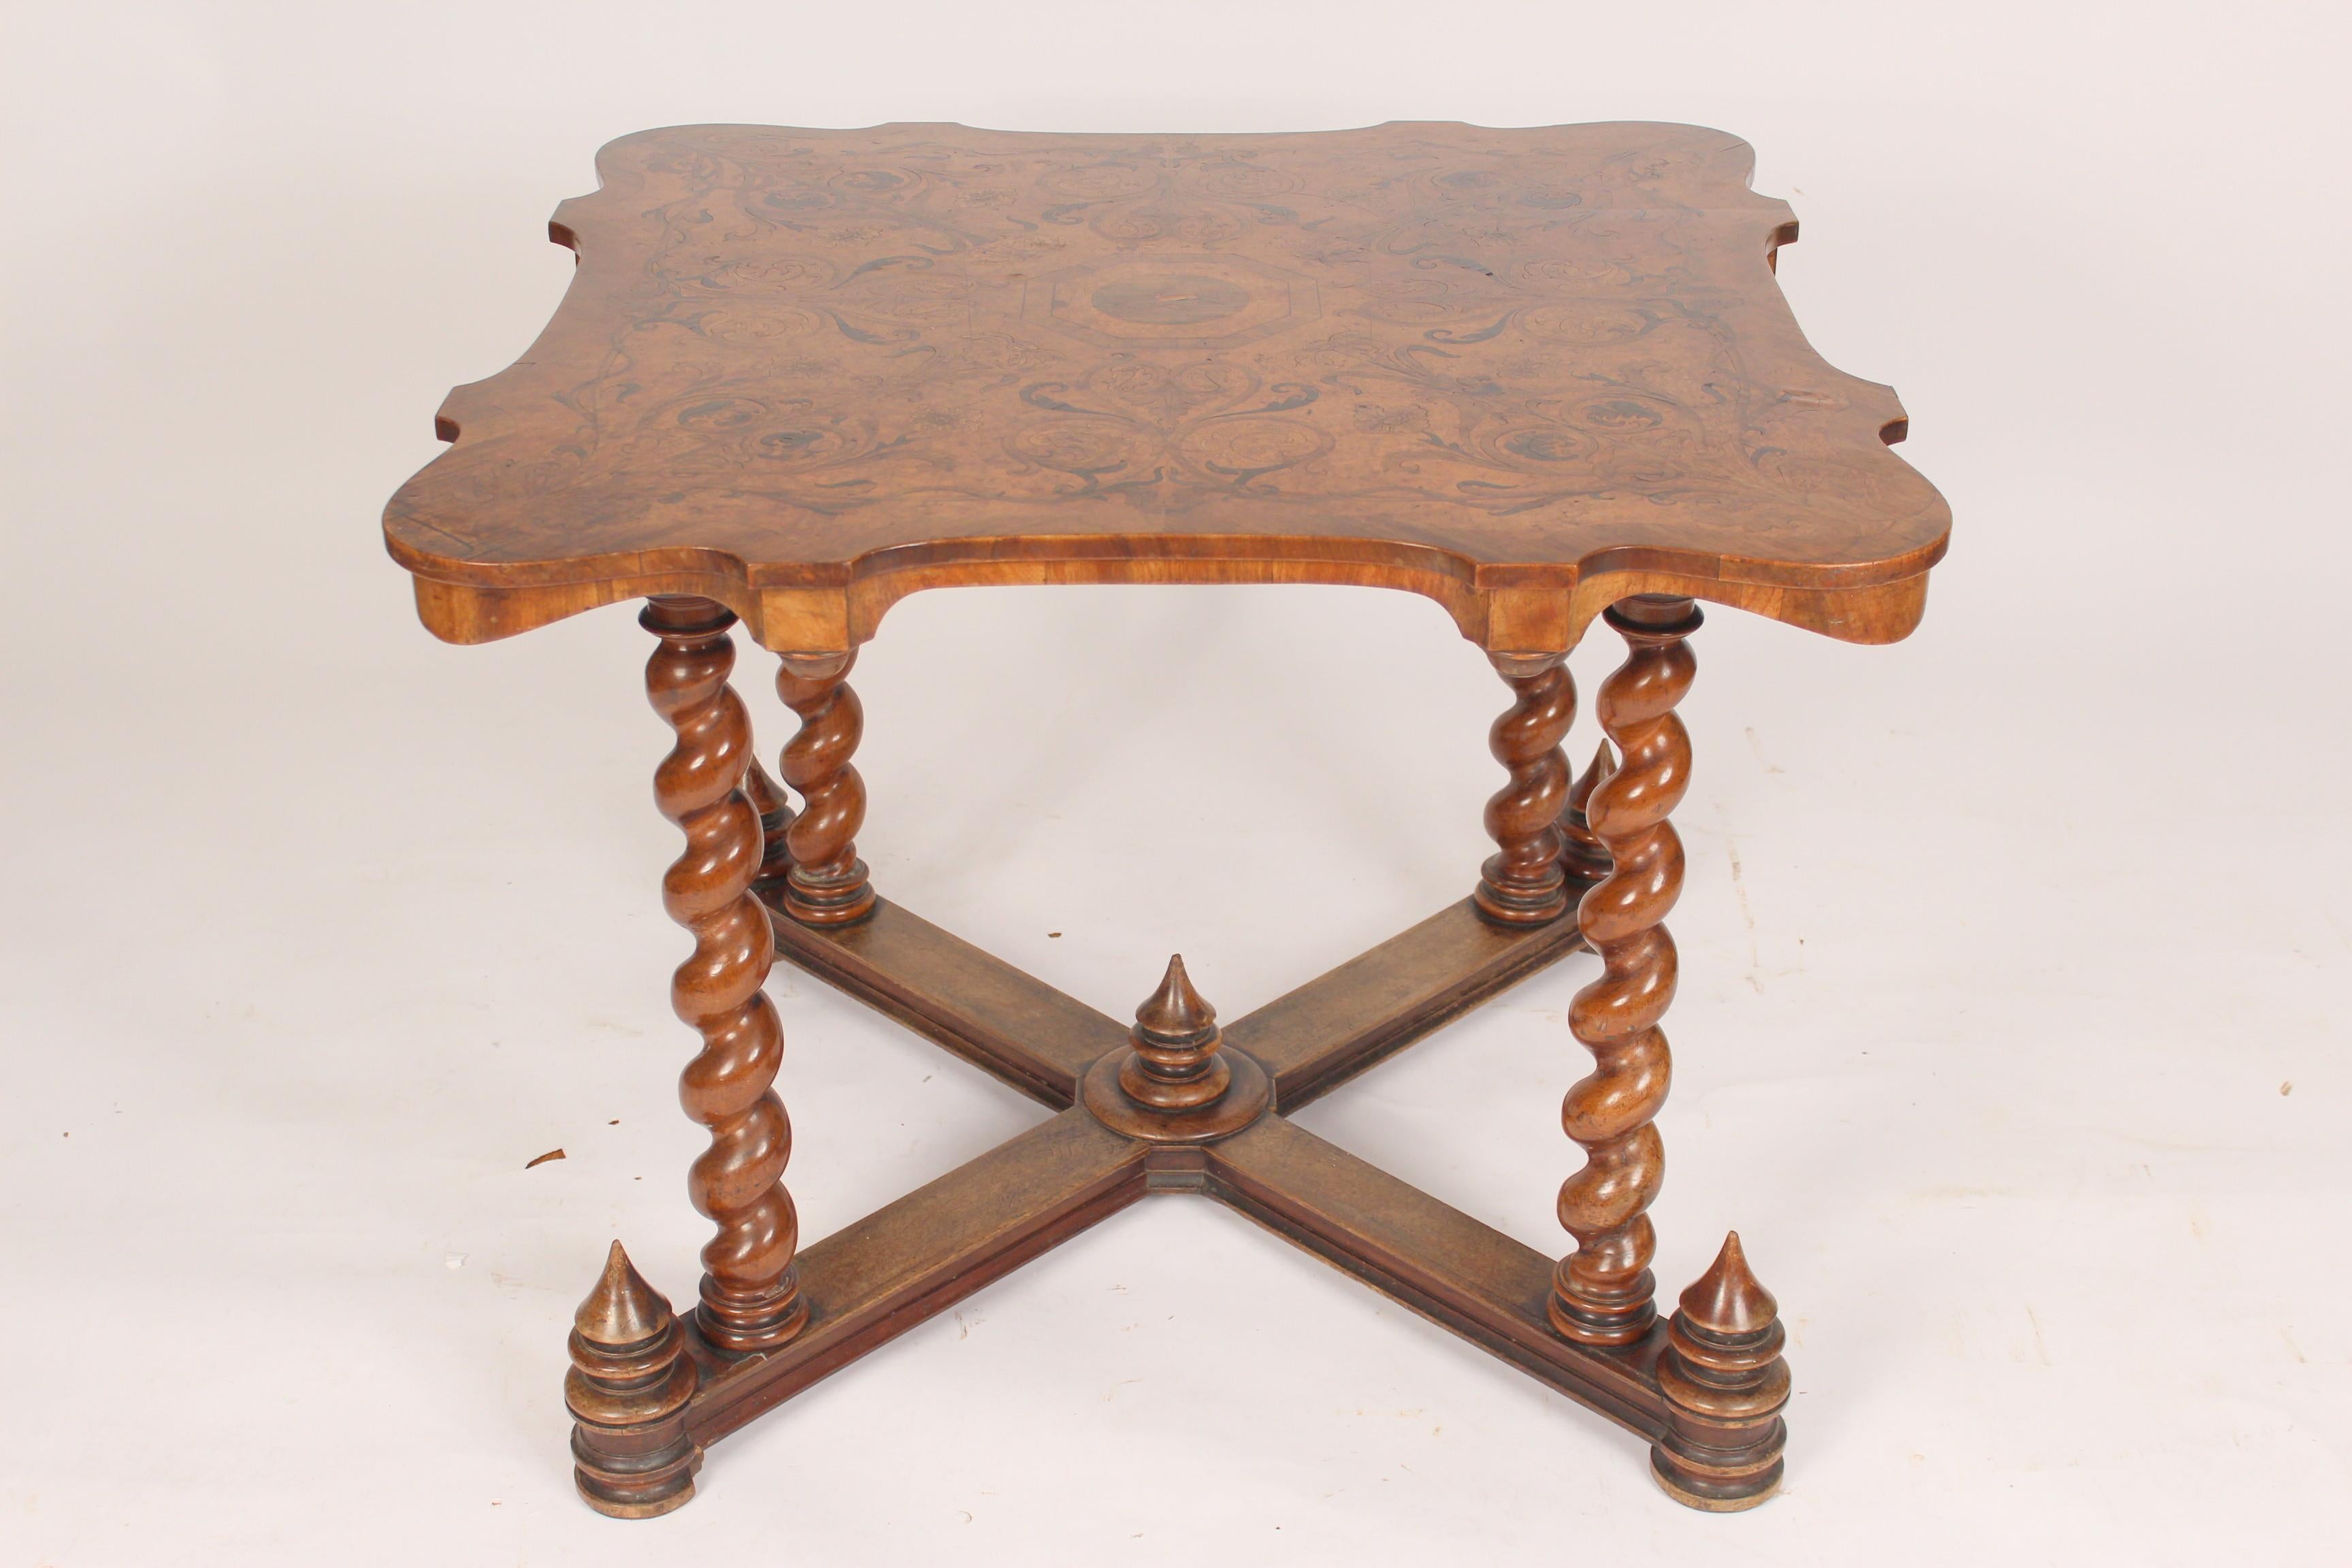 Baroque style games table with an inlaid burl ash top and barley twist legs, late 20th century. The knee clearance is 25